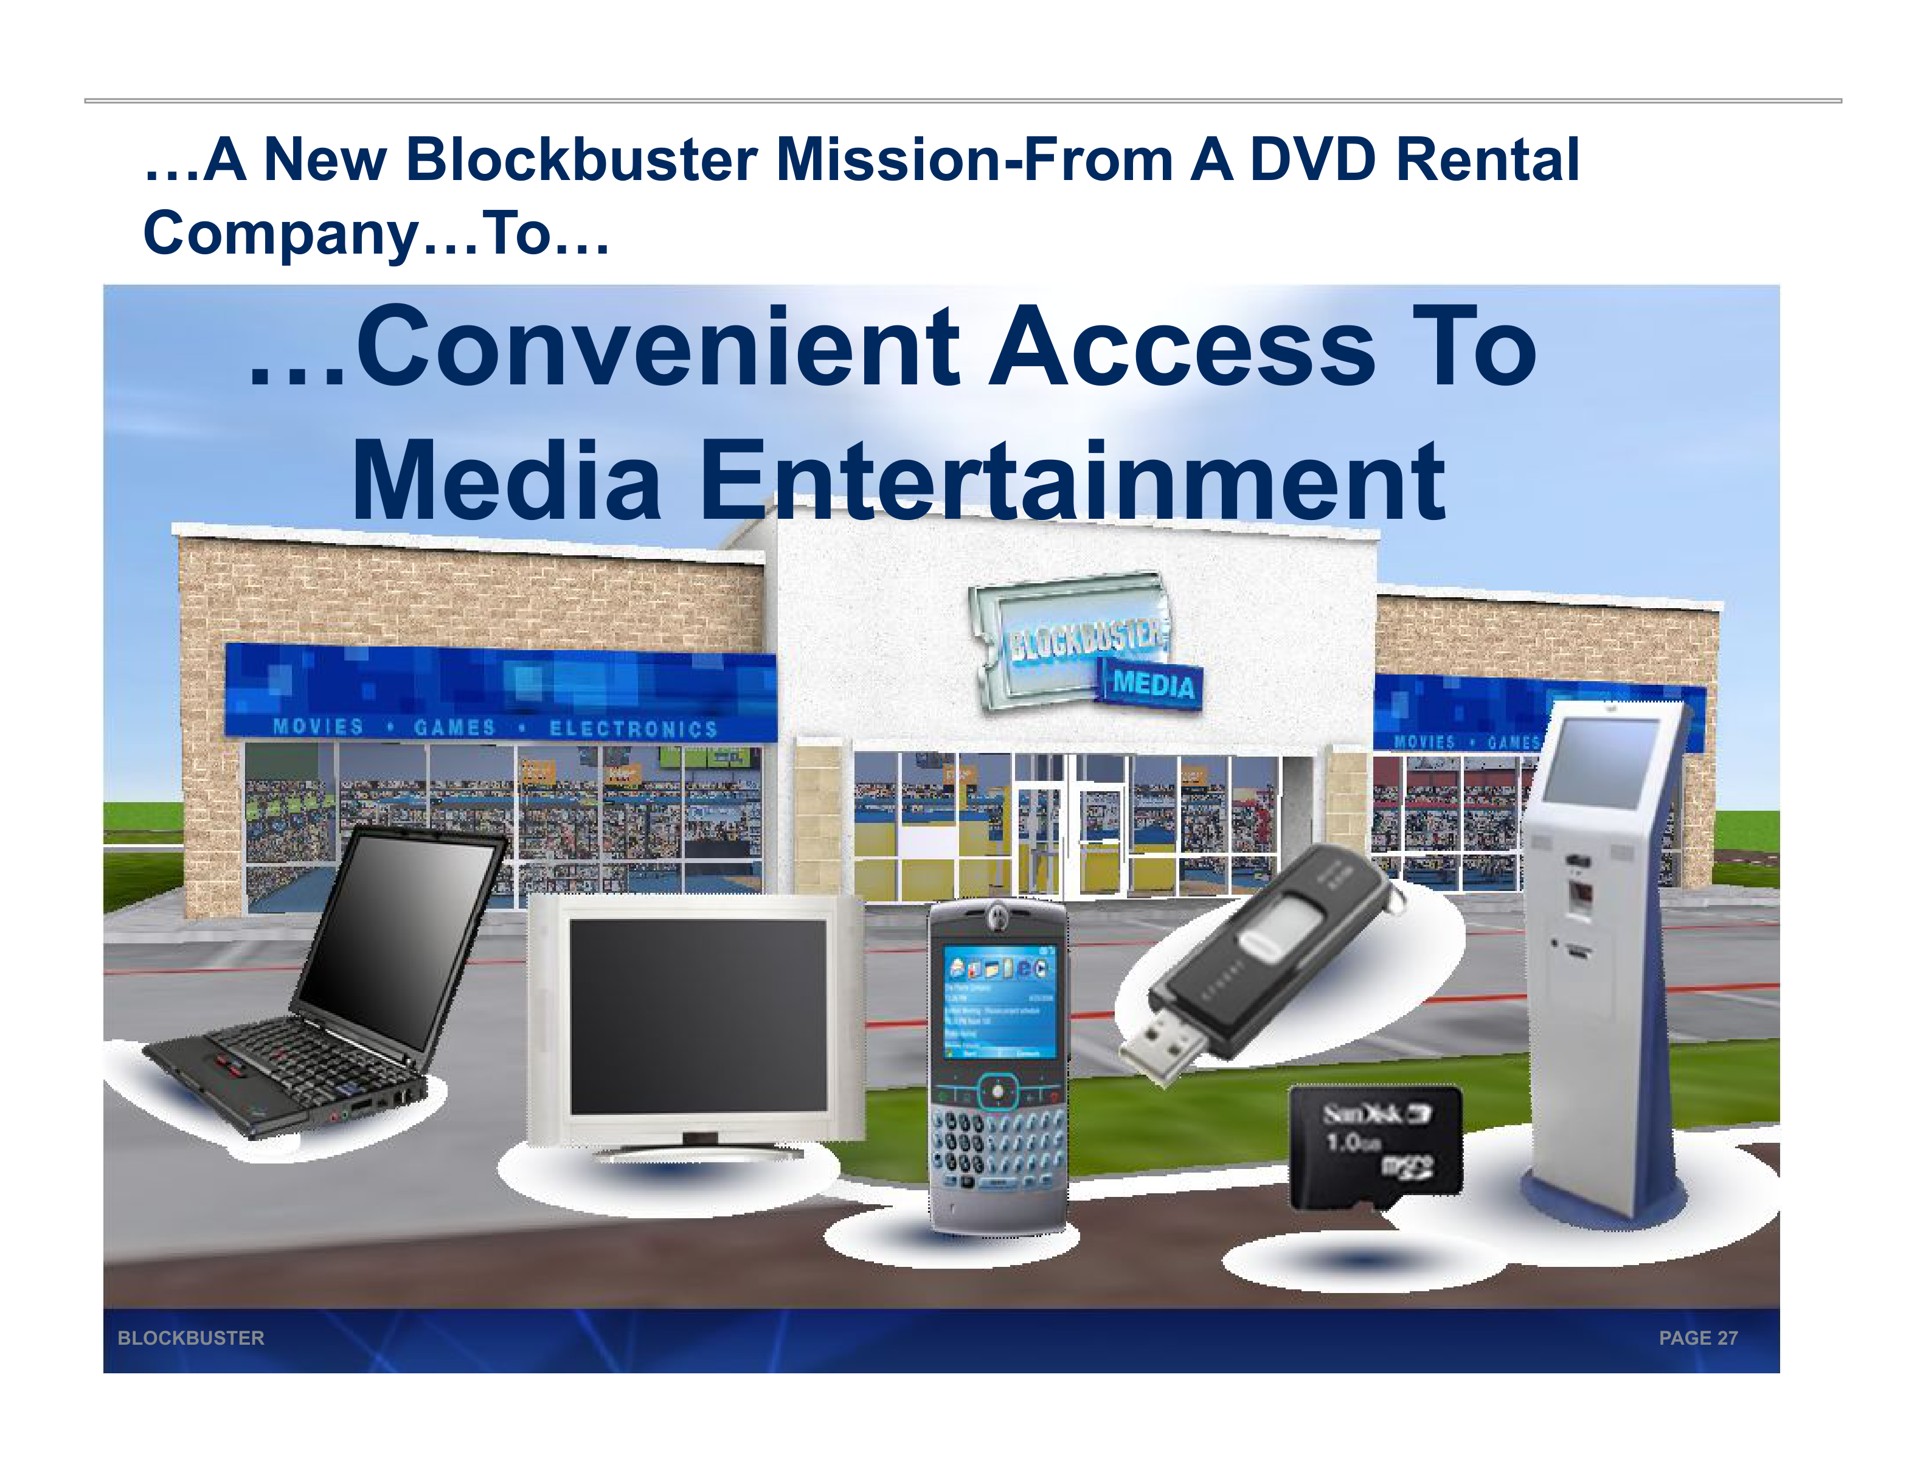 a new blockbuster mission from a rental company to convenient access to media entertainment | Blockbuster Video